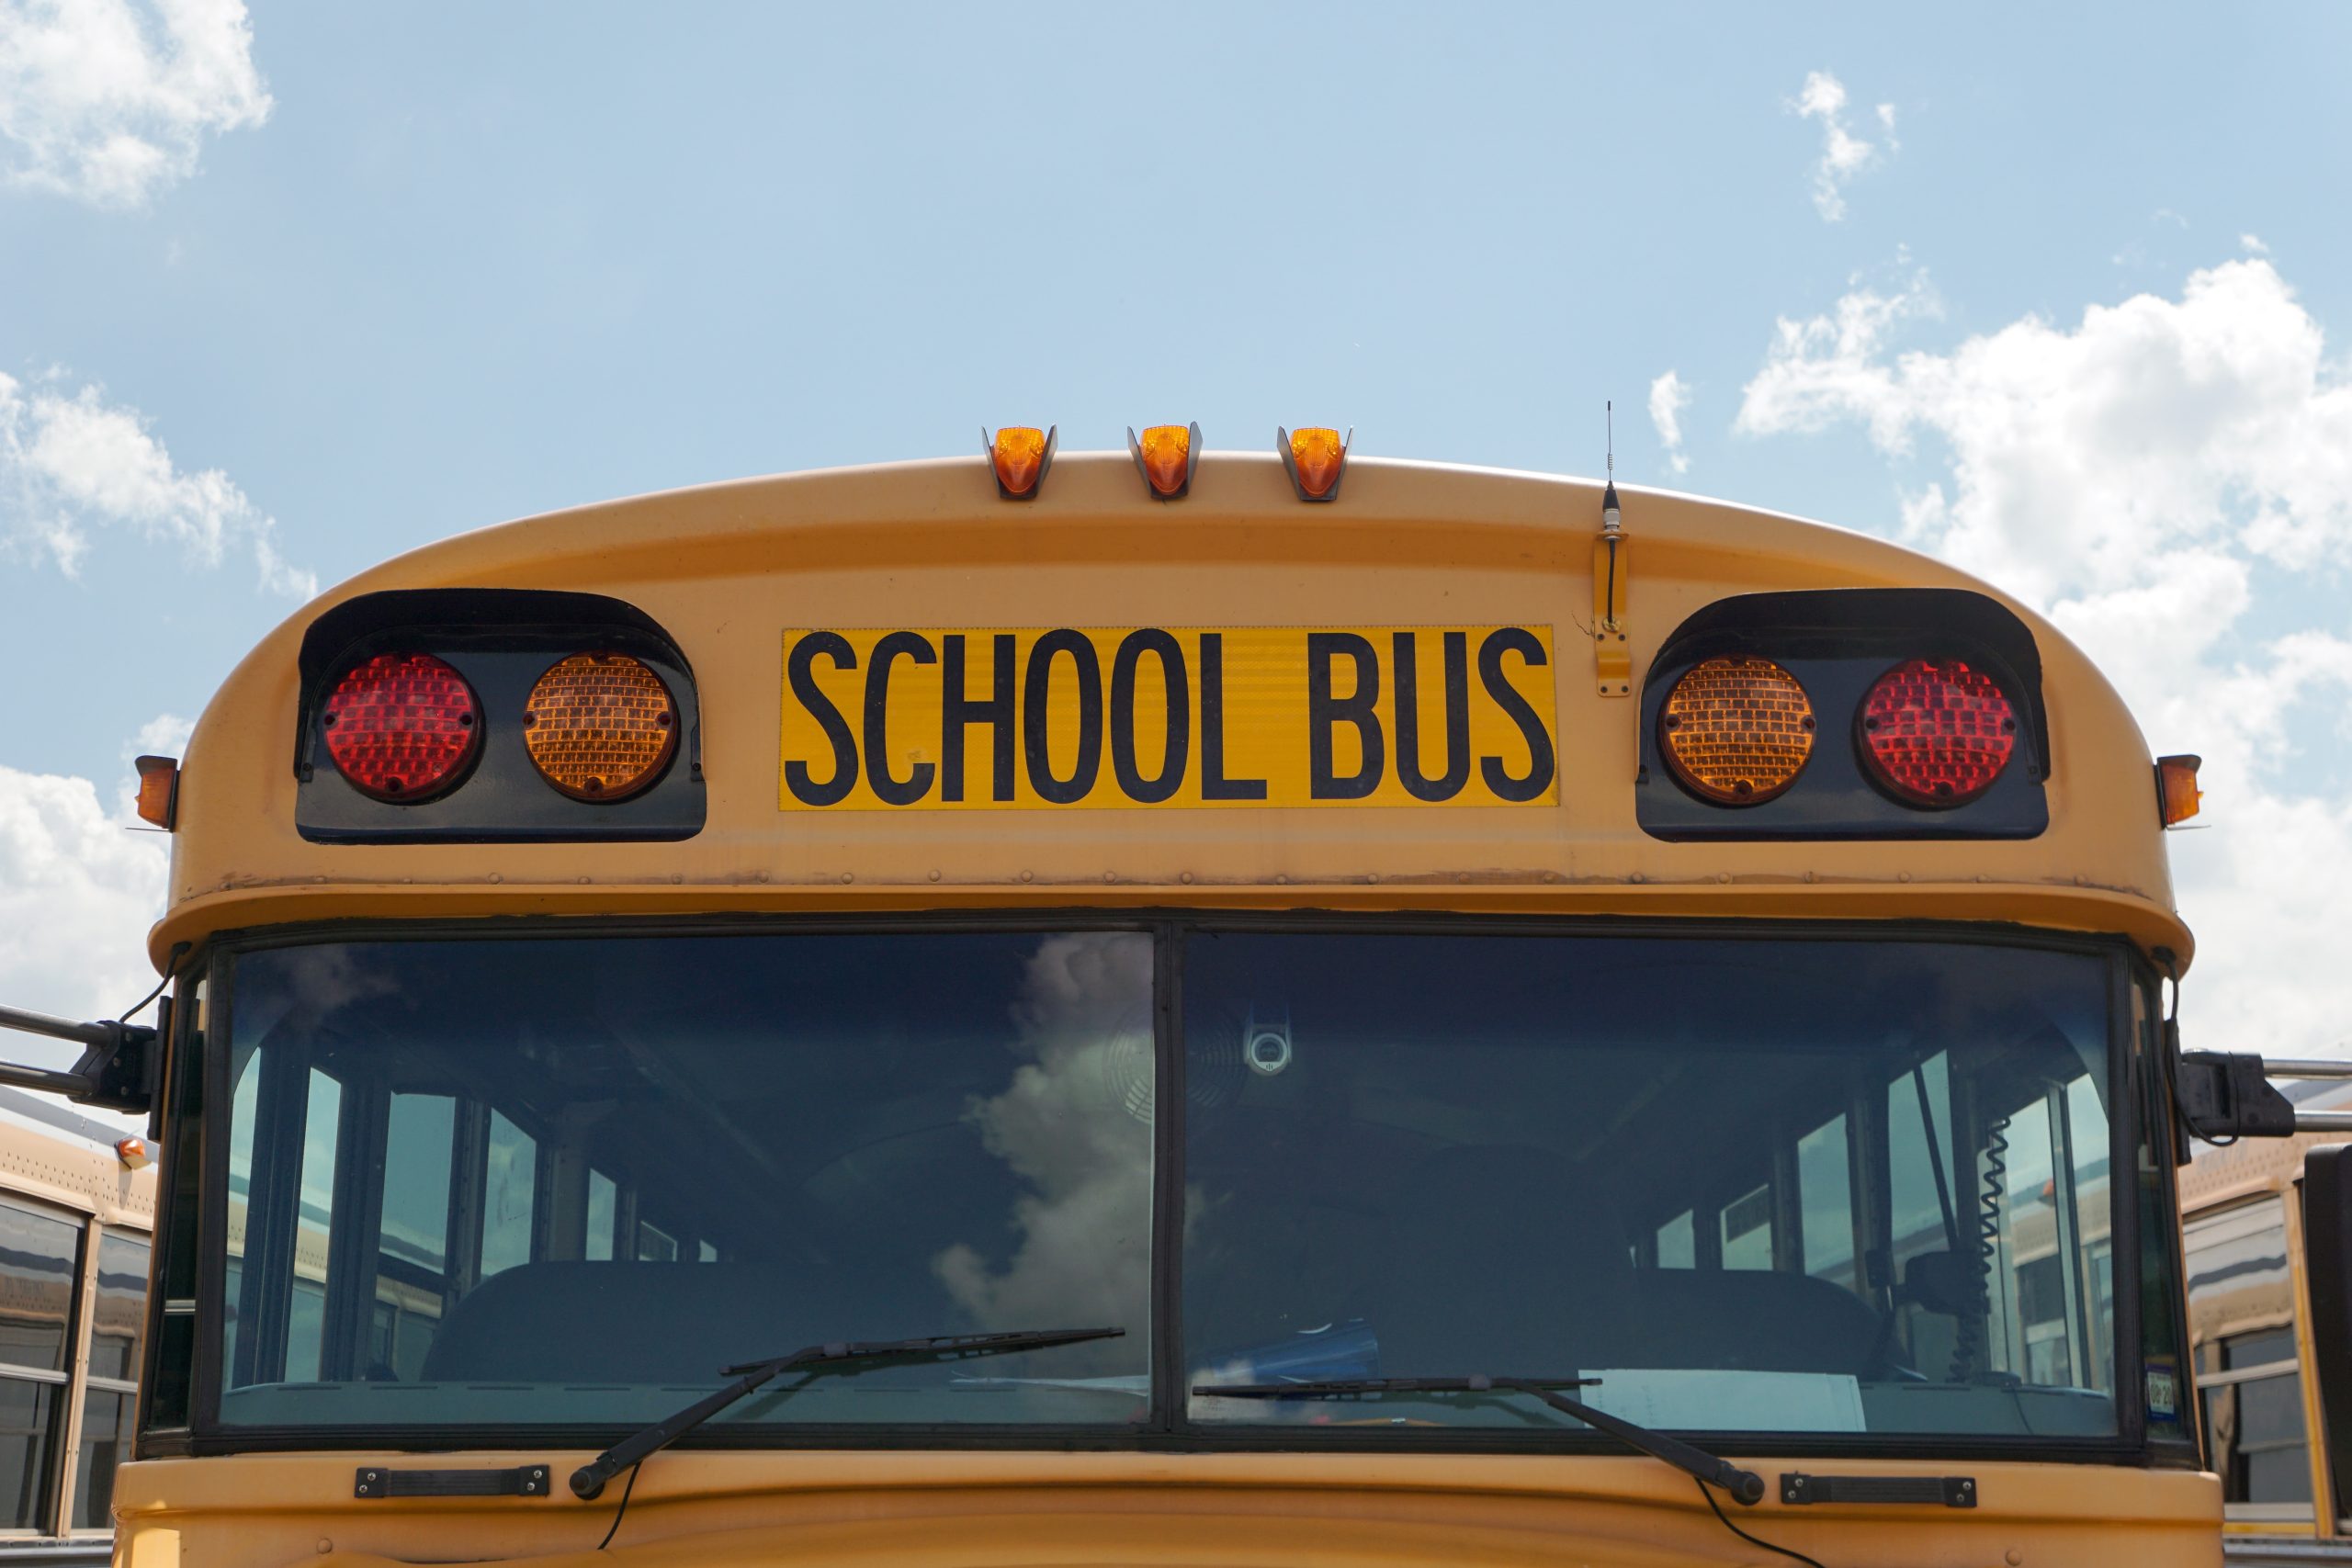 The top front of a school bus